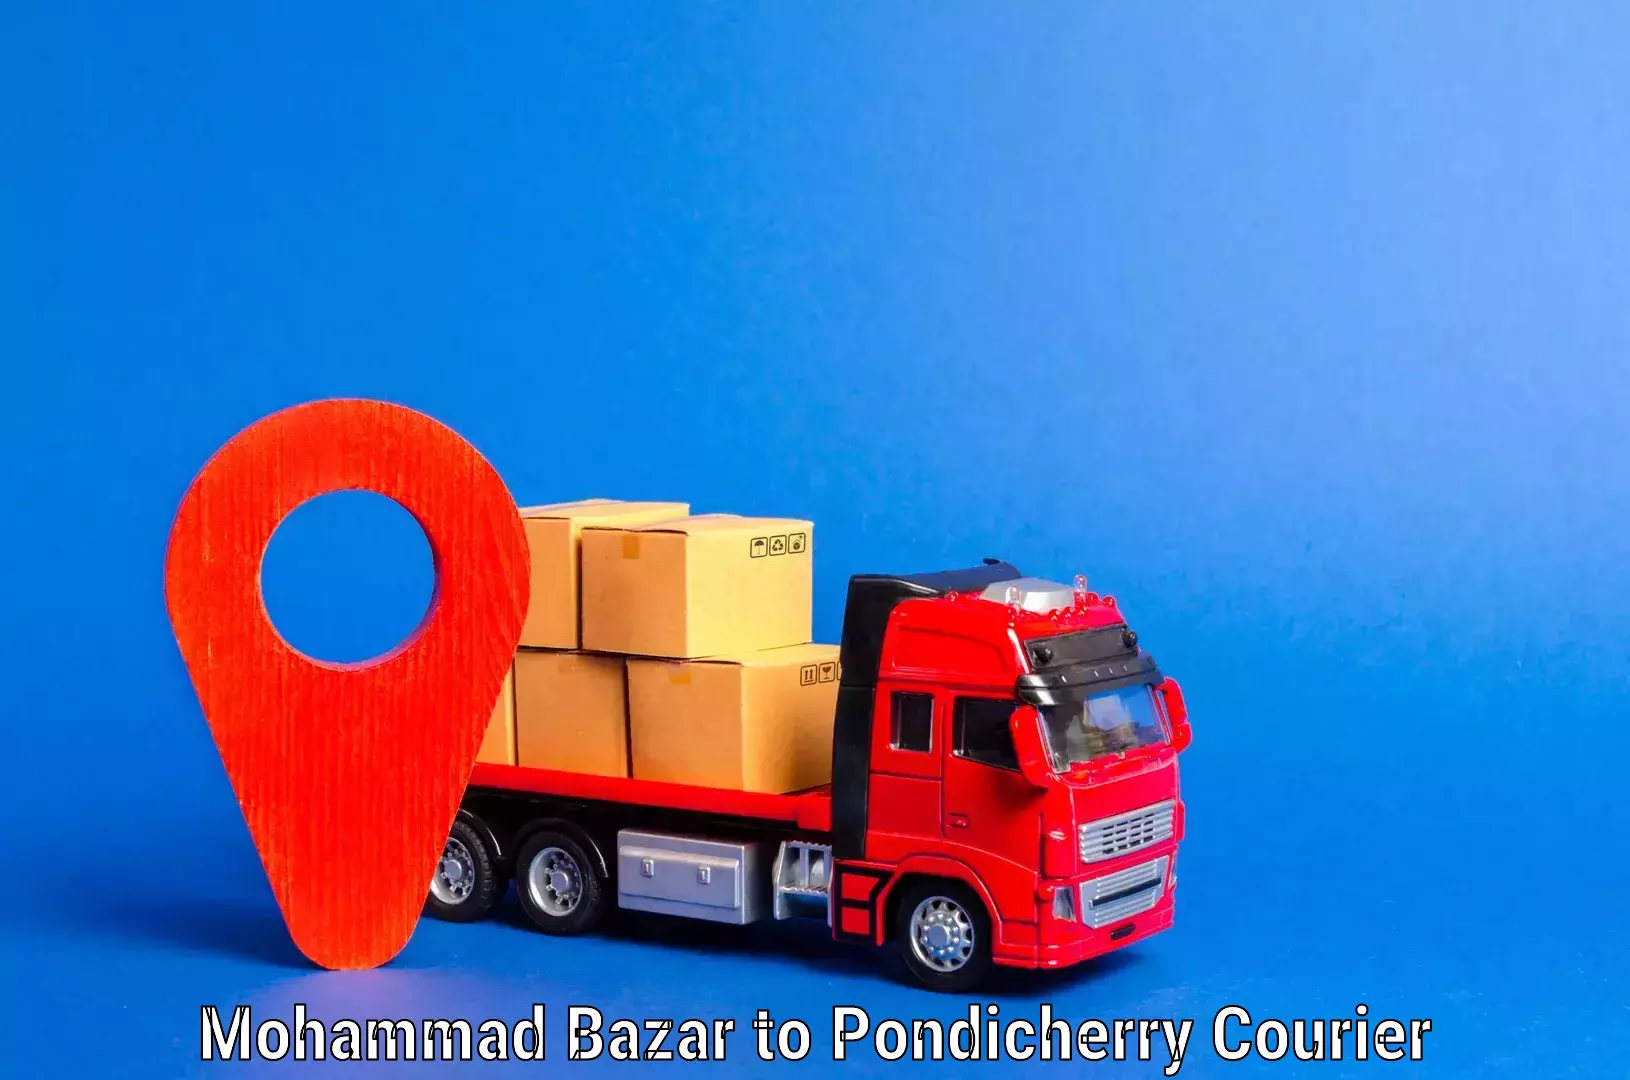 Professional furniture movers Mohammad Bazar to Pondicherry